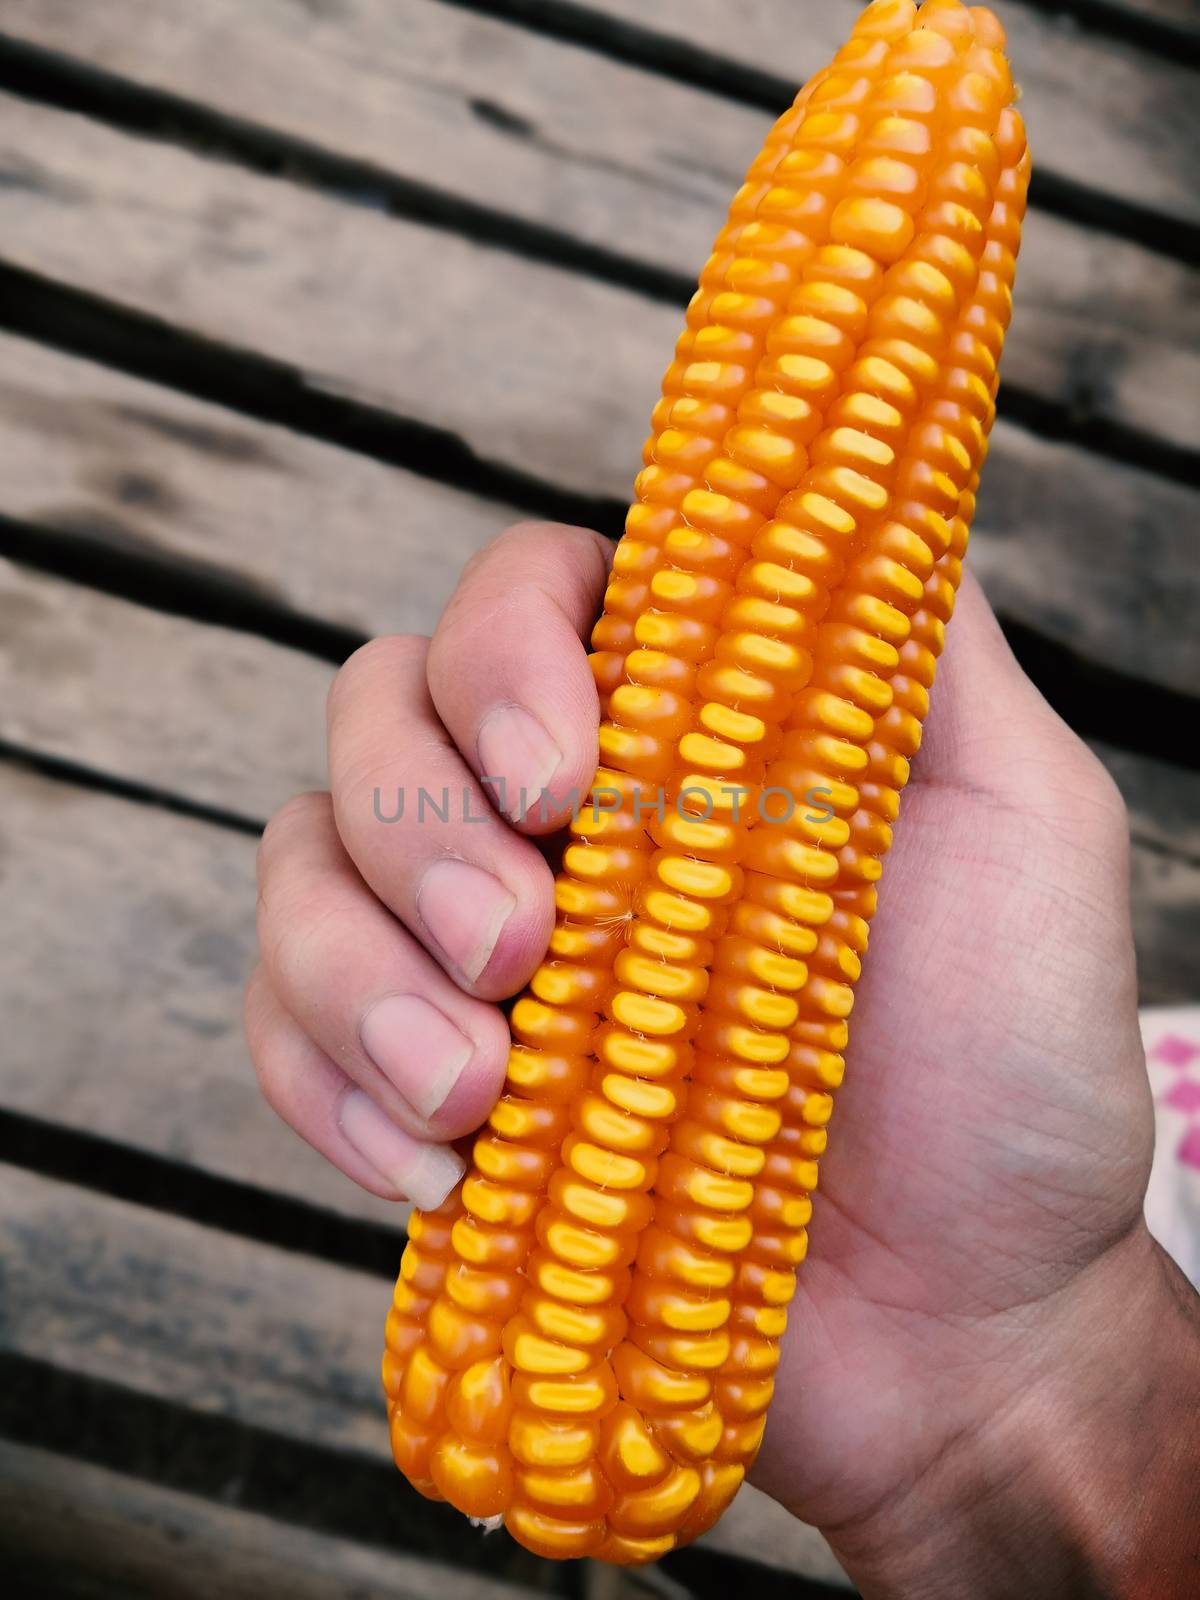 A man's hand holding a dry corn used in livestock